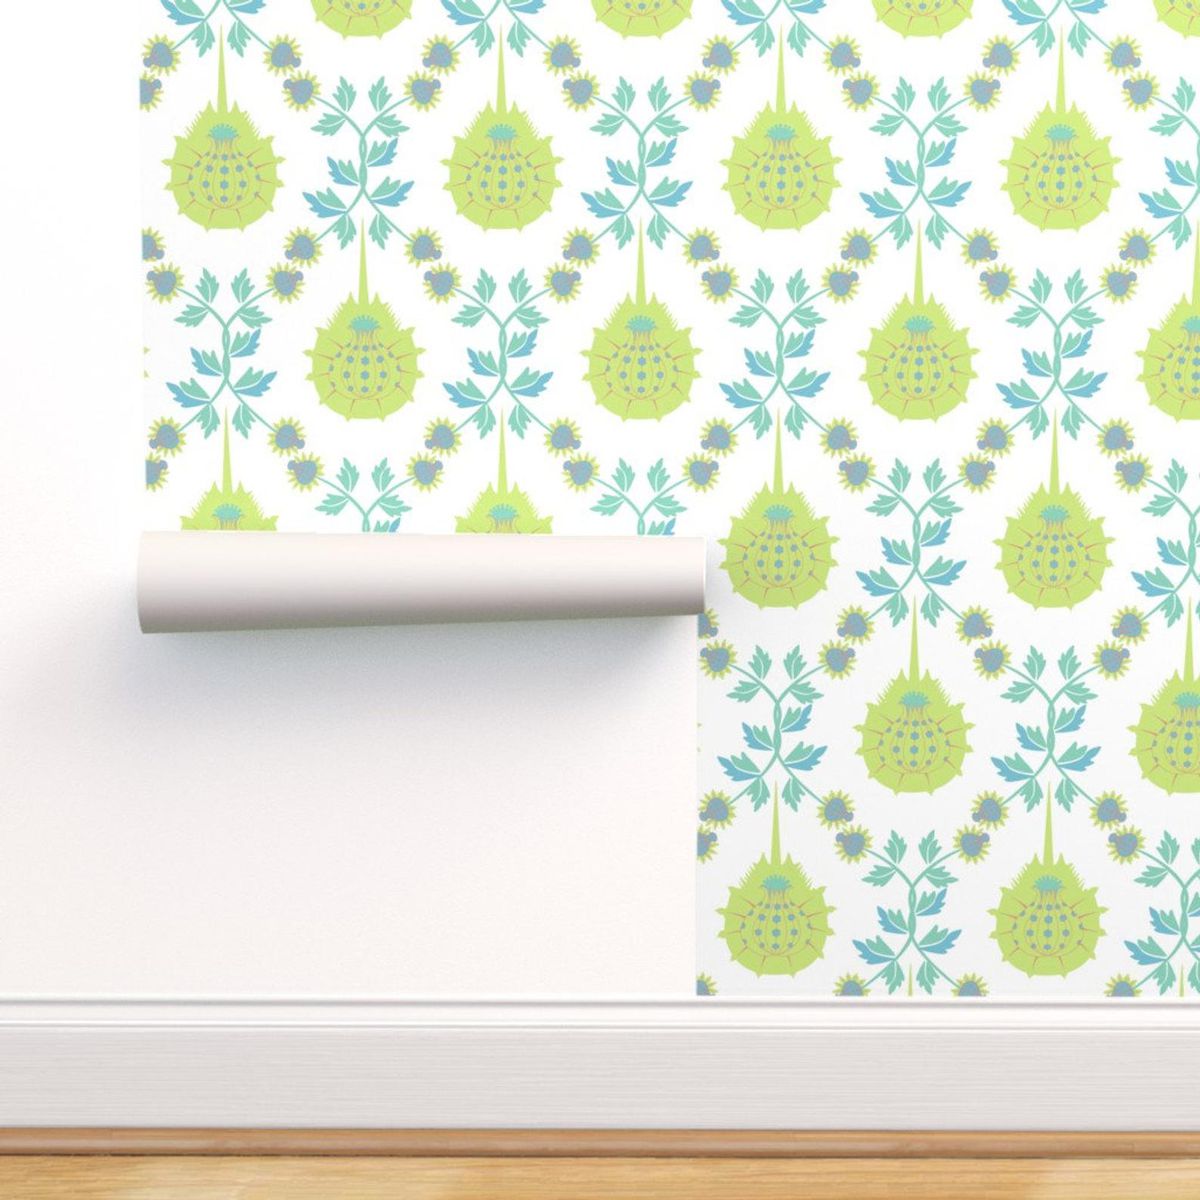 Wallpaper with a lime green horseshoe crab pattern